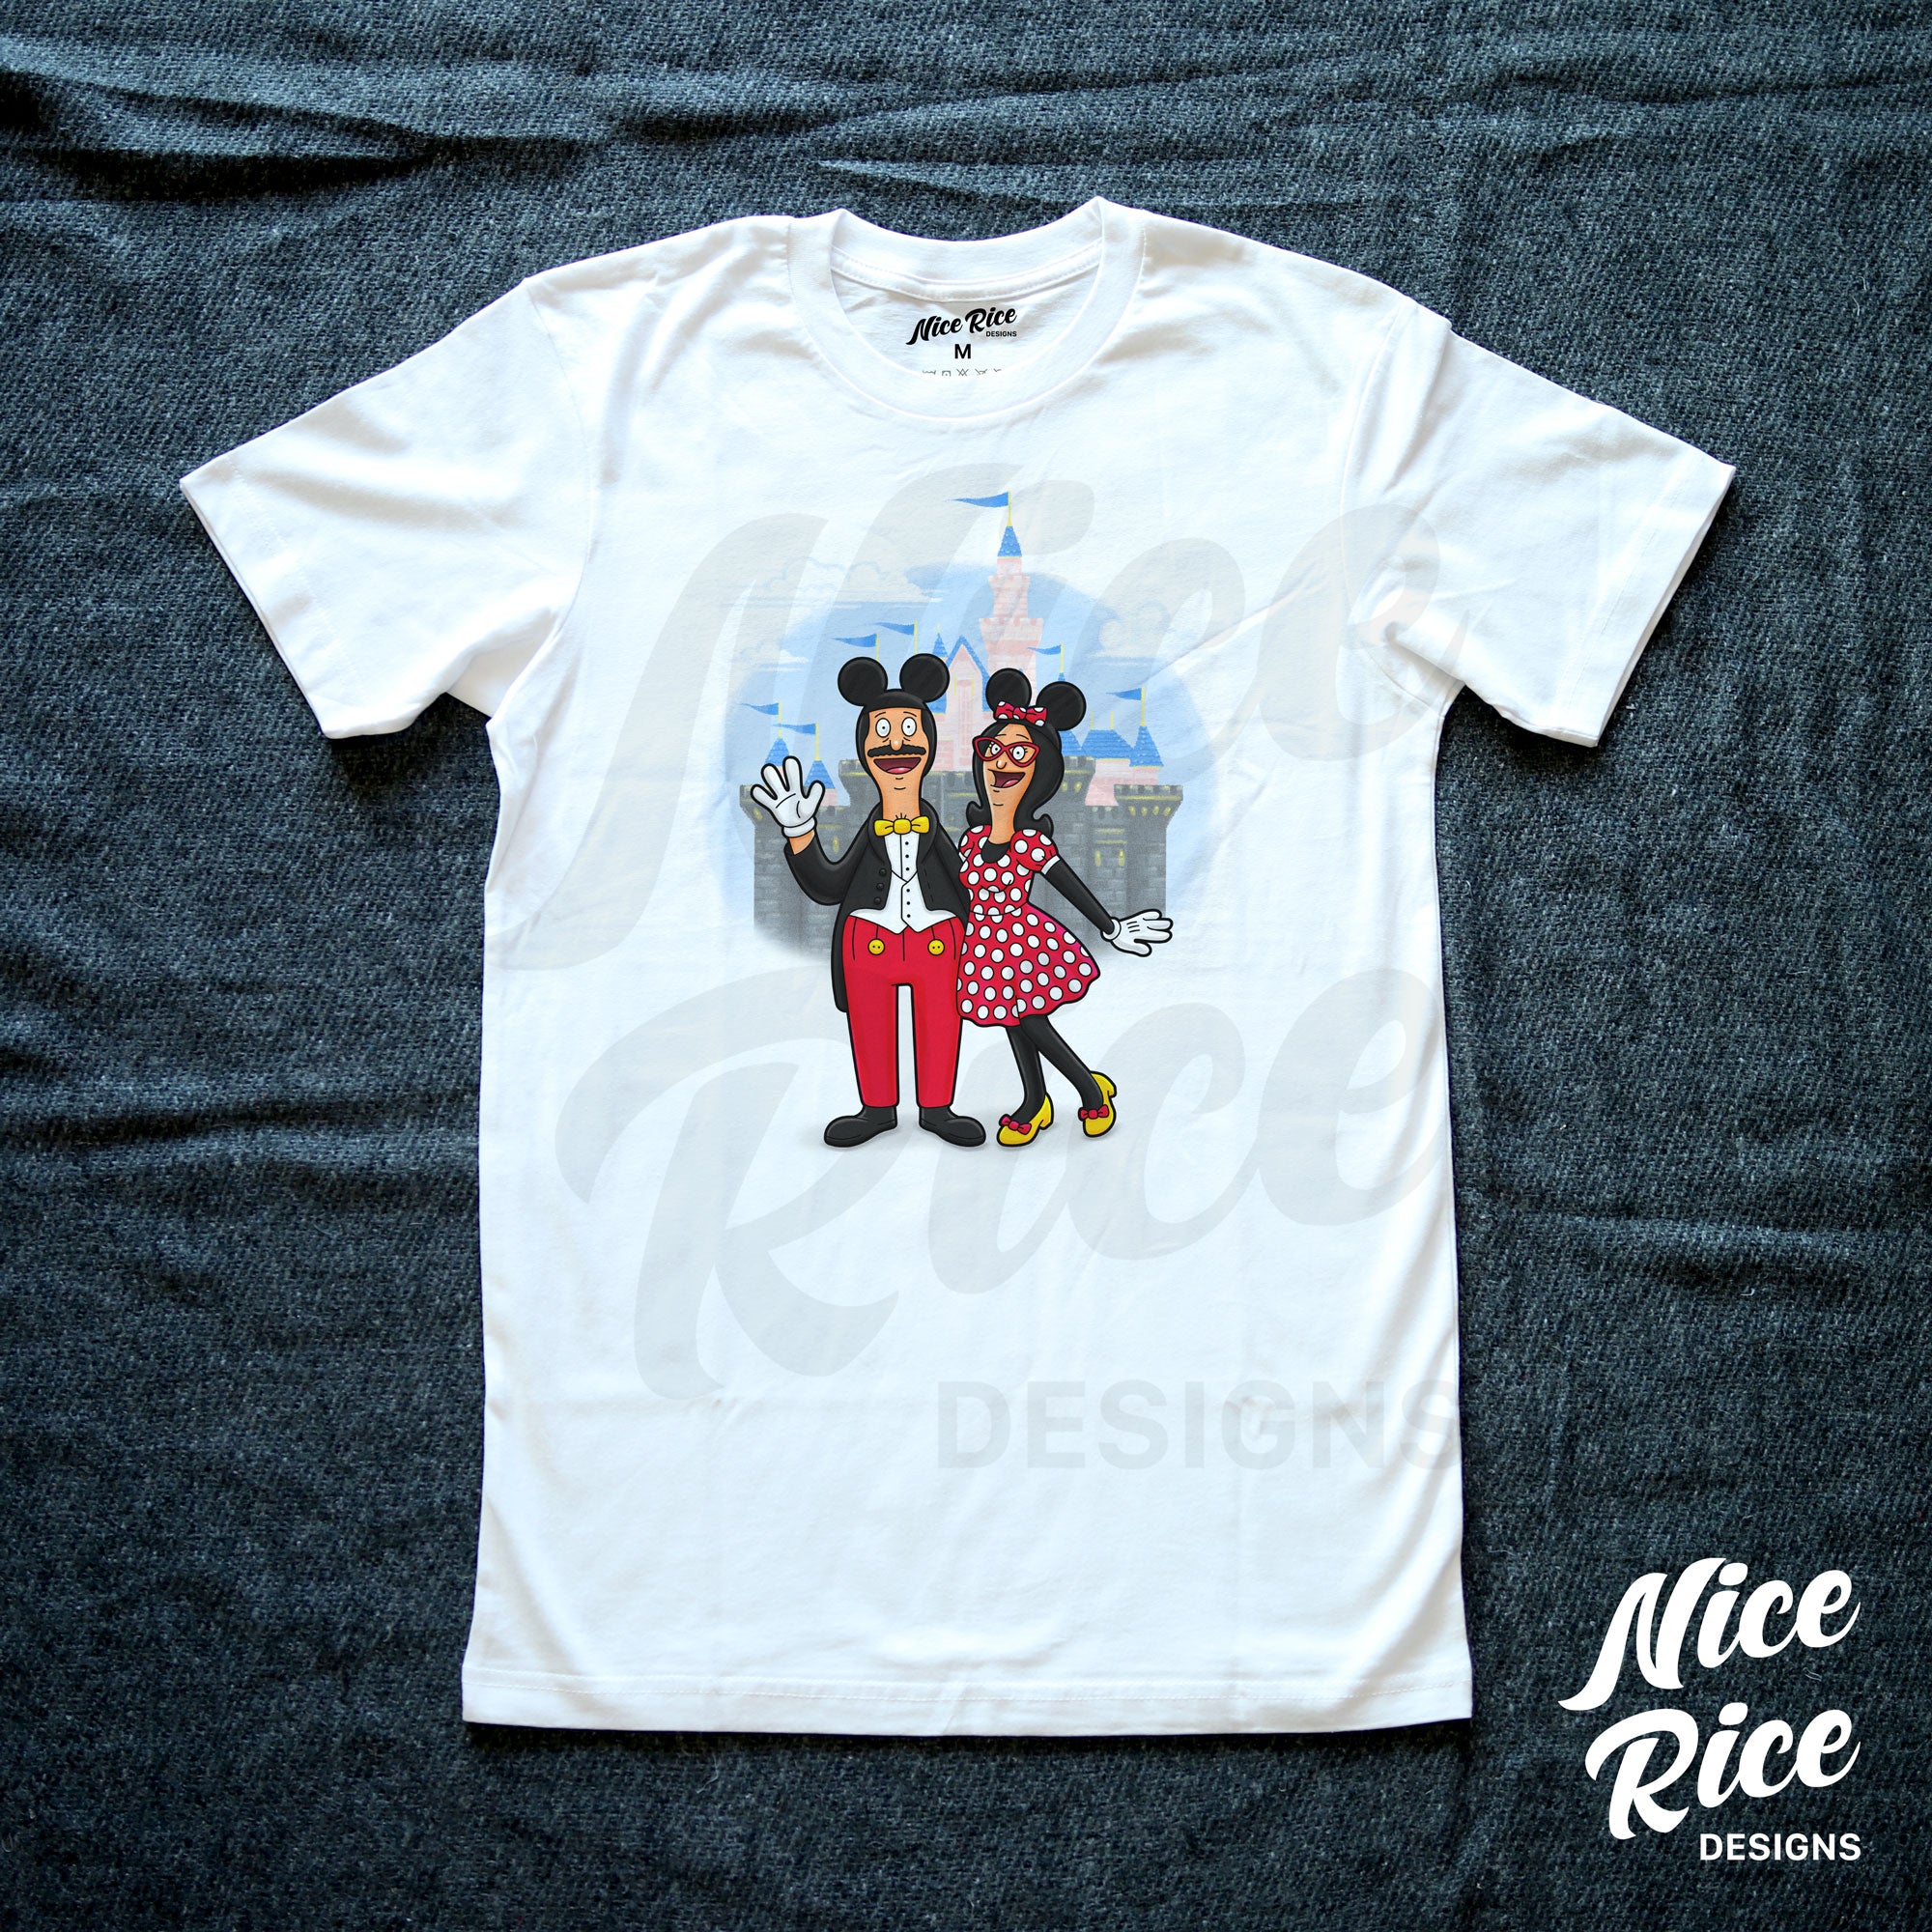 Magical Couple Shirt by Nice Rice Designs